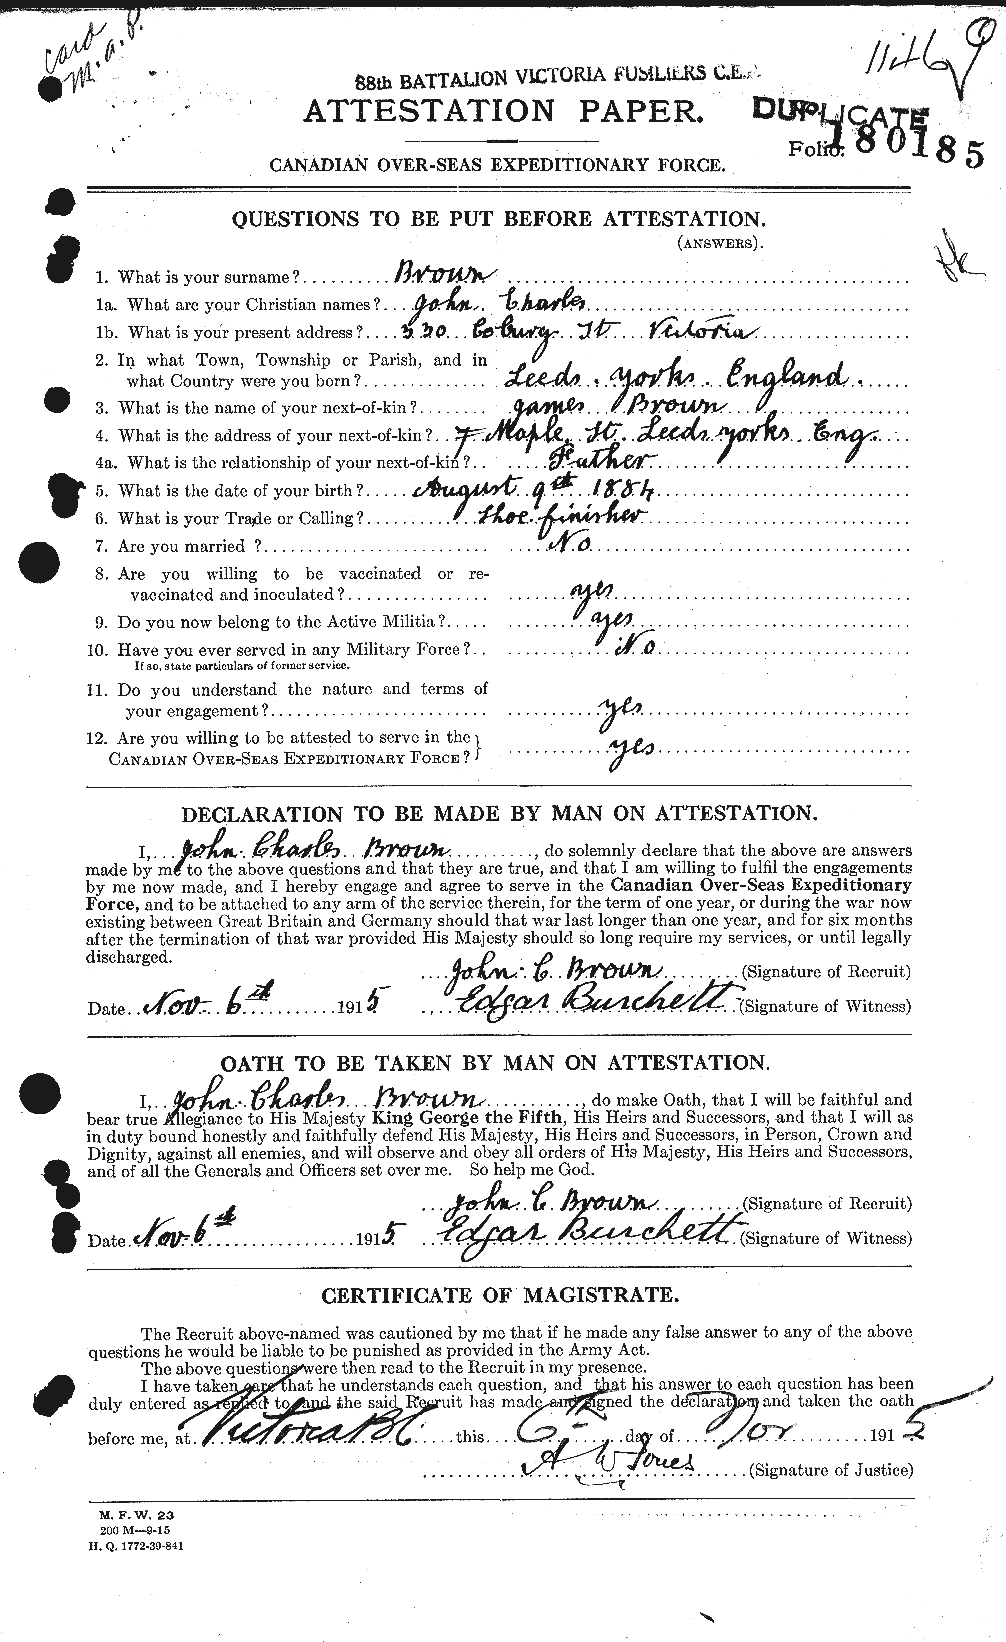 Personnel Records of the First World War - CEF 264577a